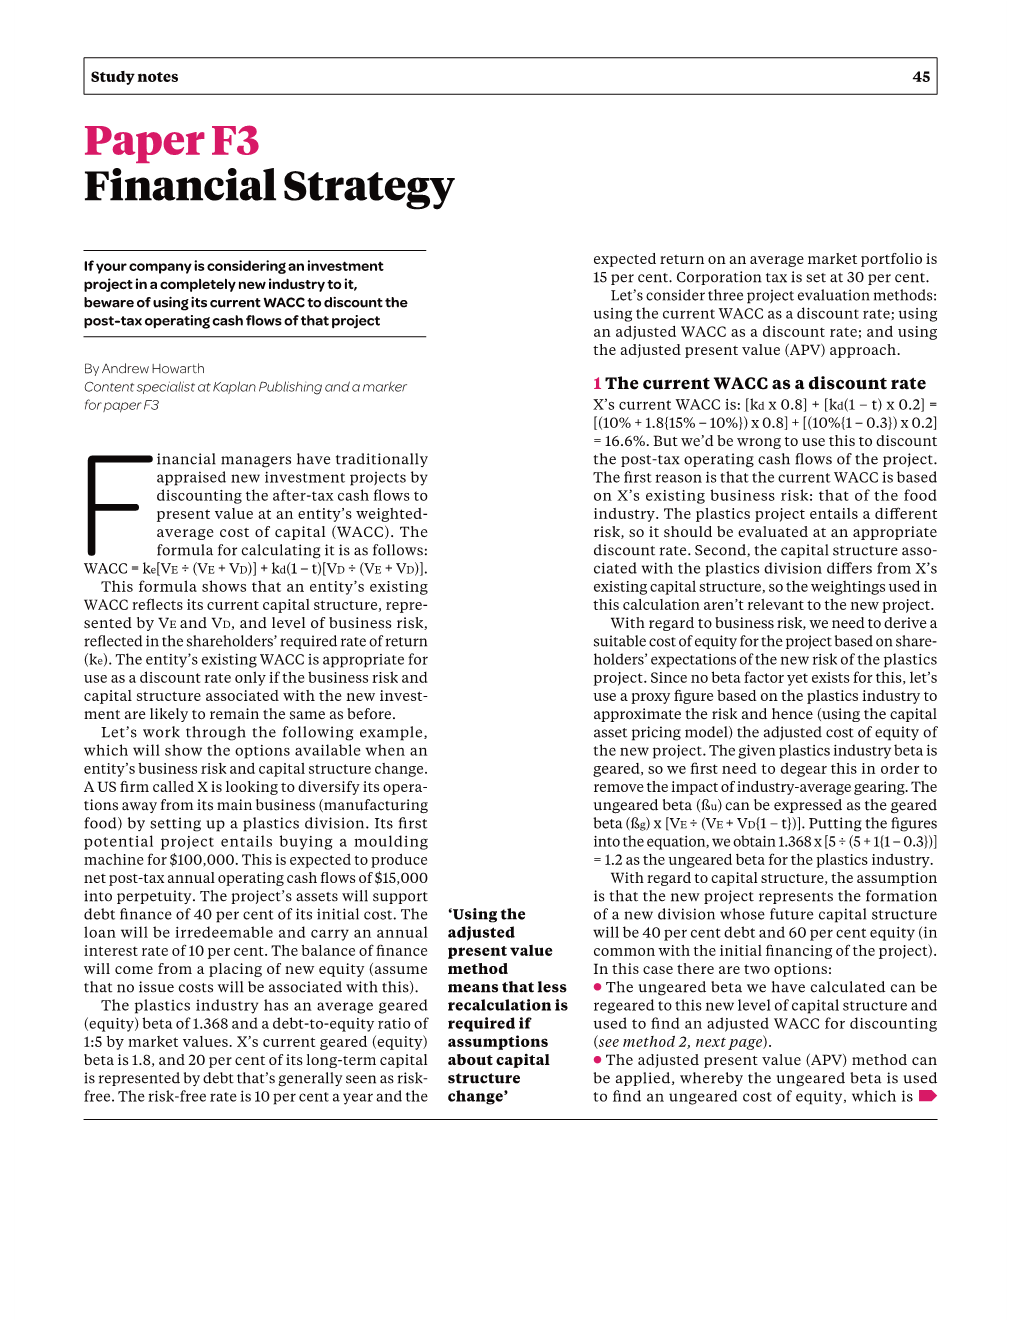 Paper F3 Financial Strategy